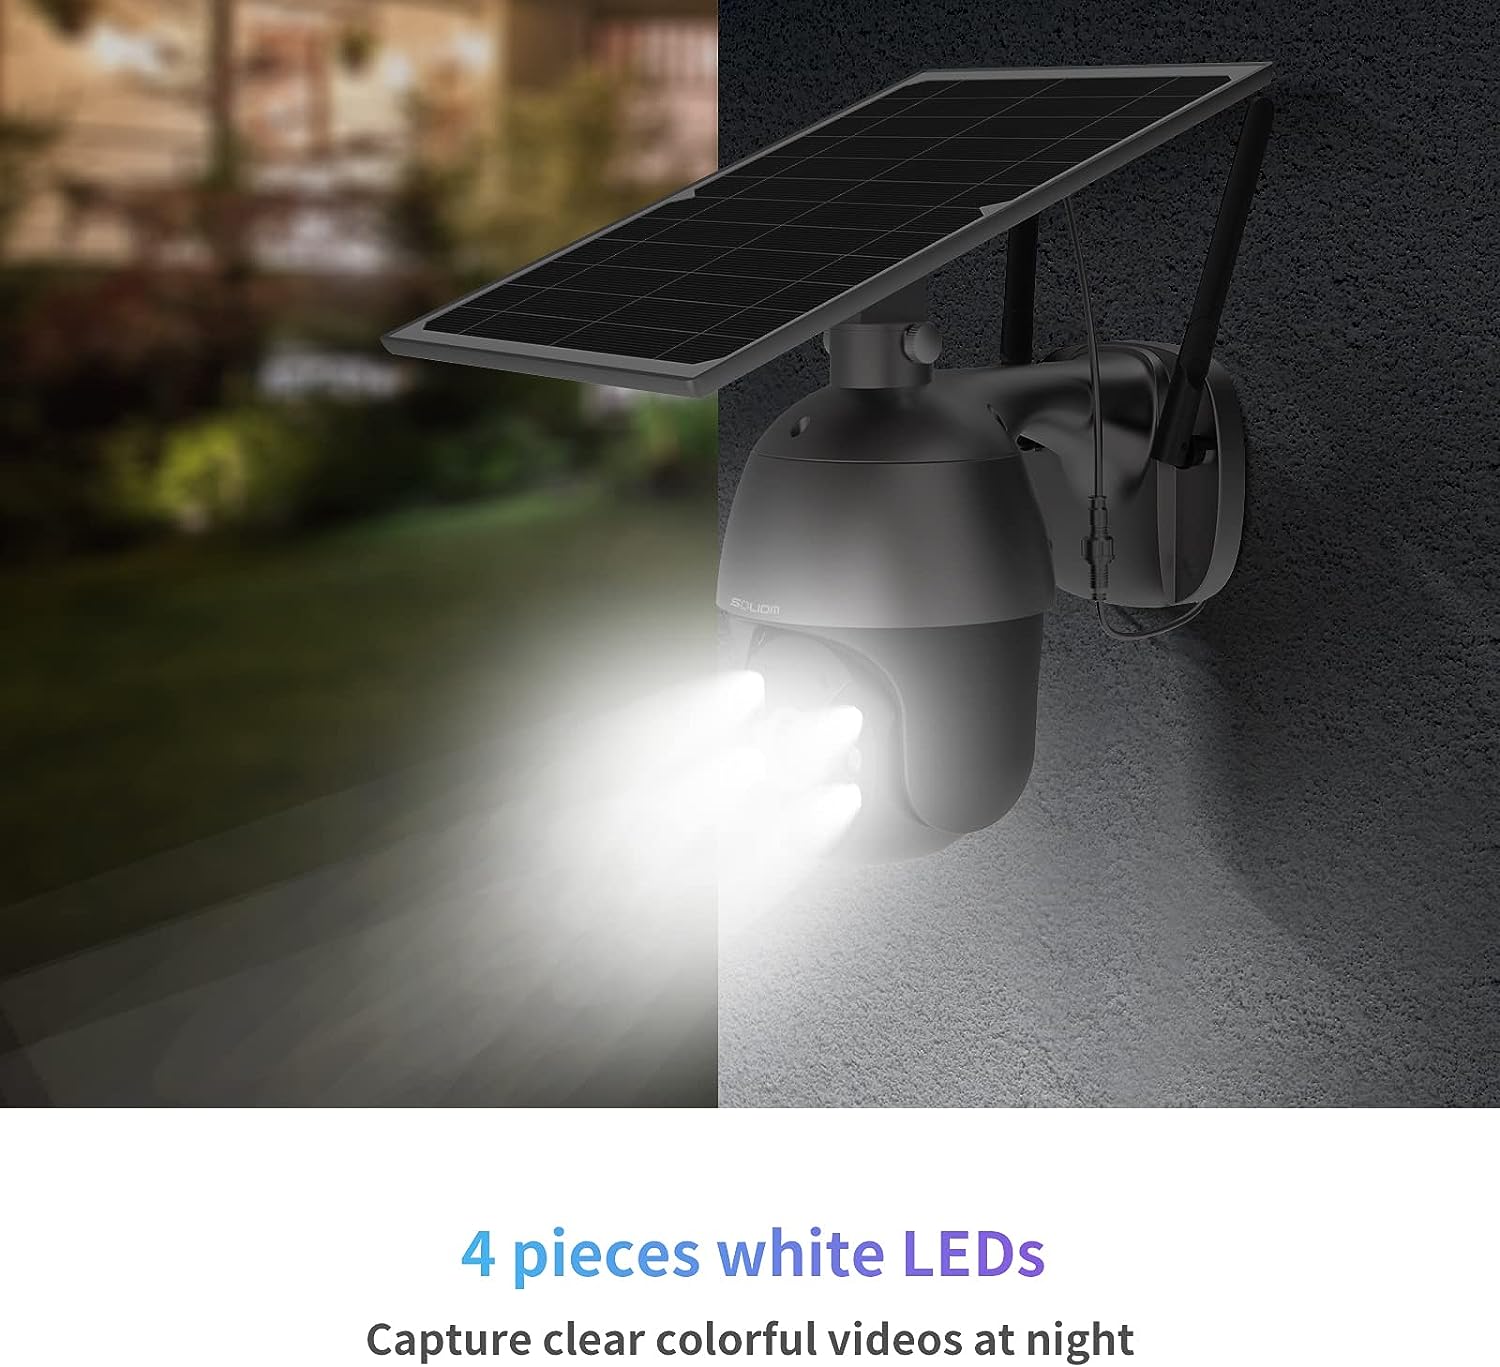 SOLIOM S600 3G/4G LTE Outdoor Solar Powered Cellular Security Camera - $65